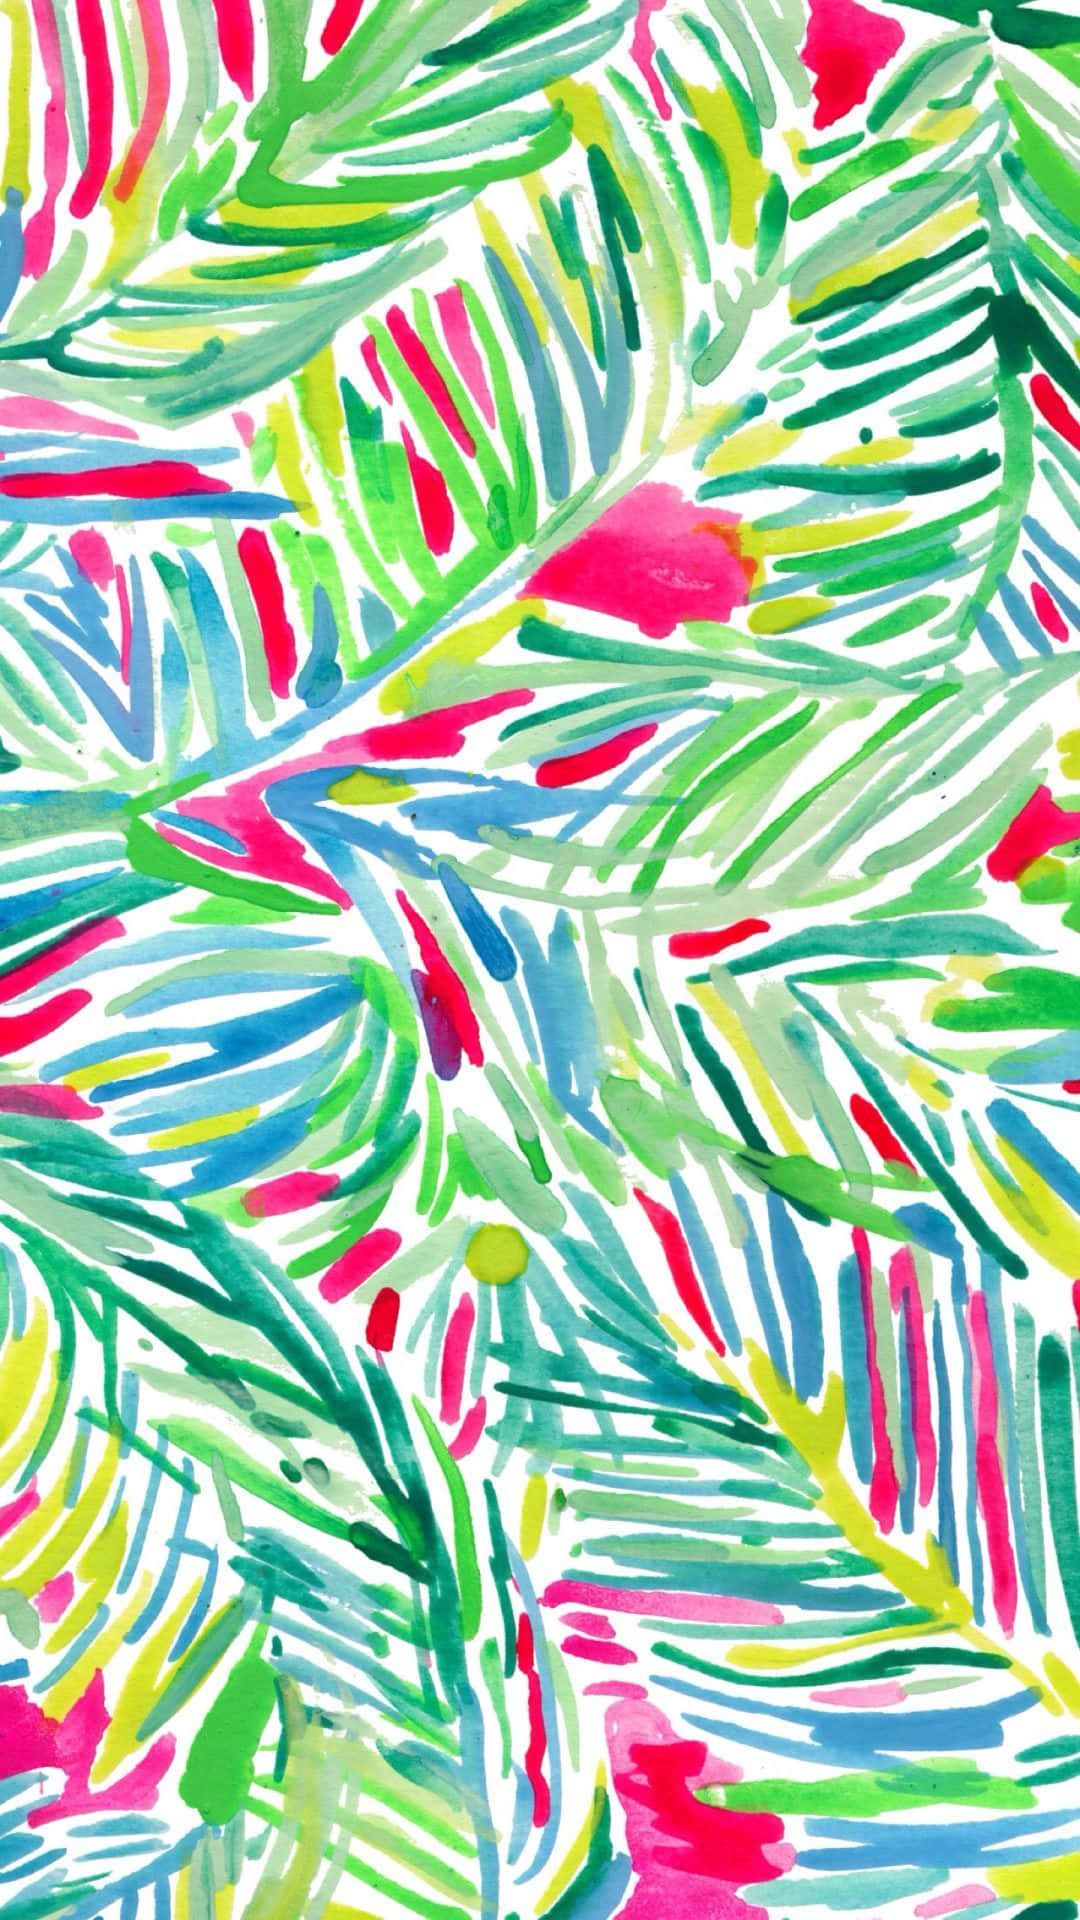 Flaunt your style with a Lilly Pulitzer inspired iPhone. Wallpaper